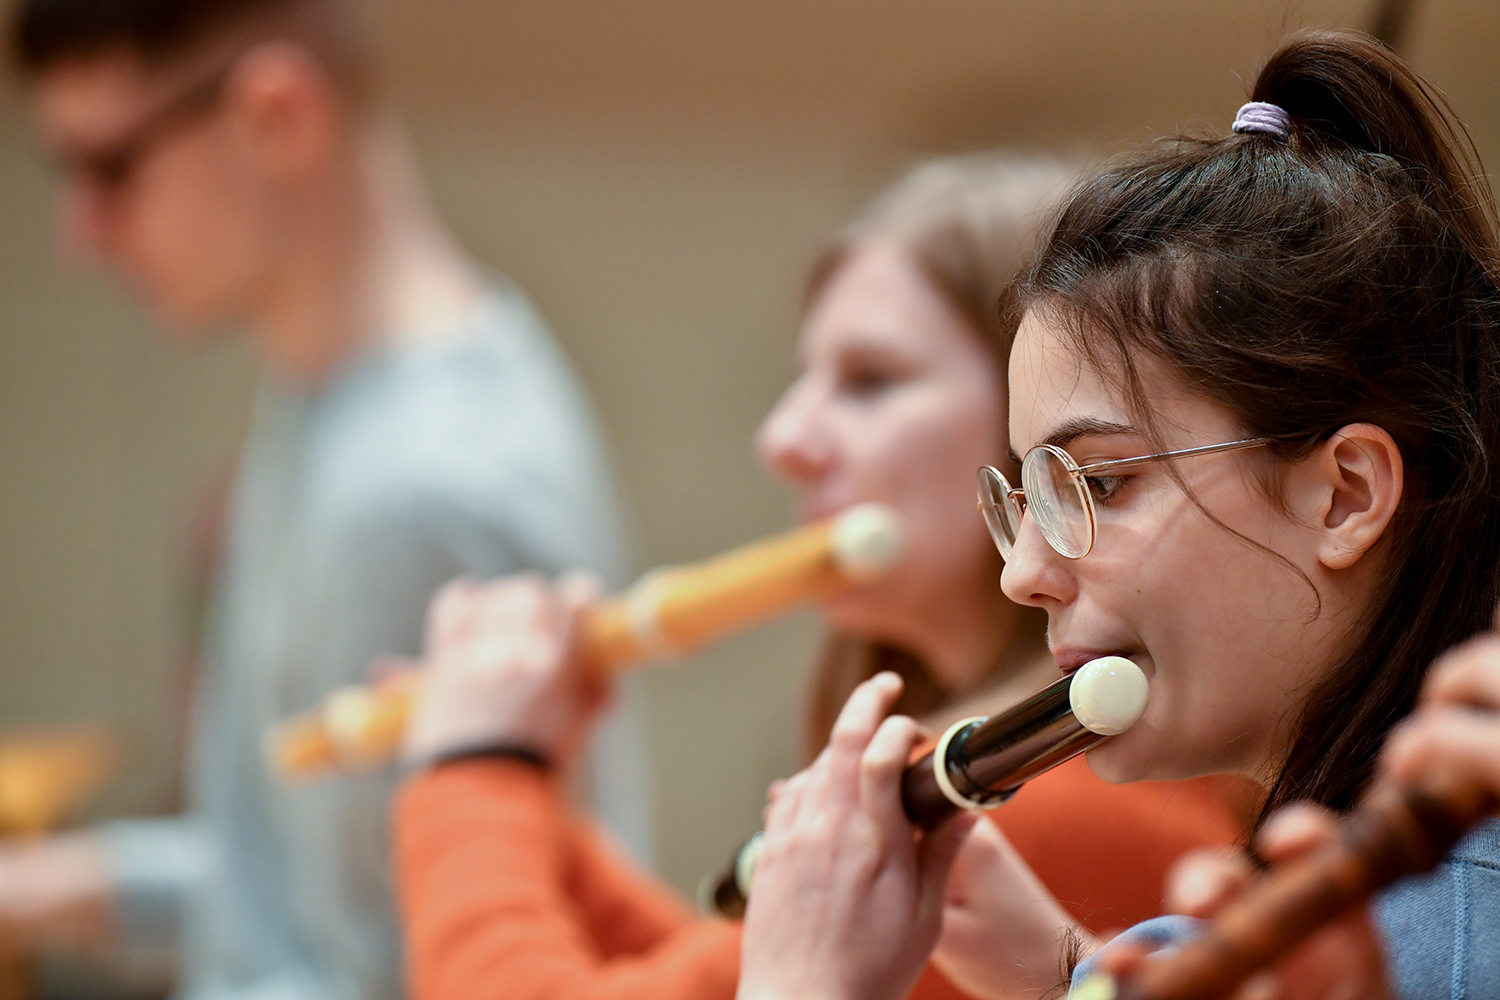 RCM Junior Department musicians performing on historical recorders